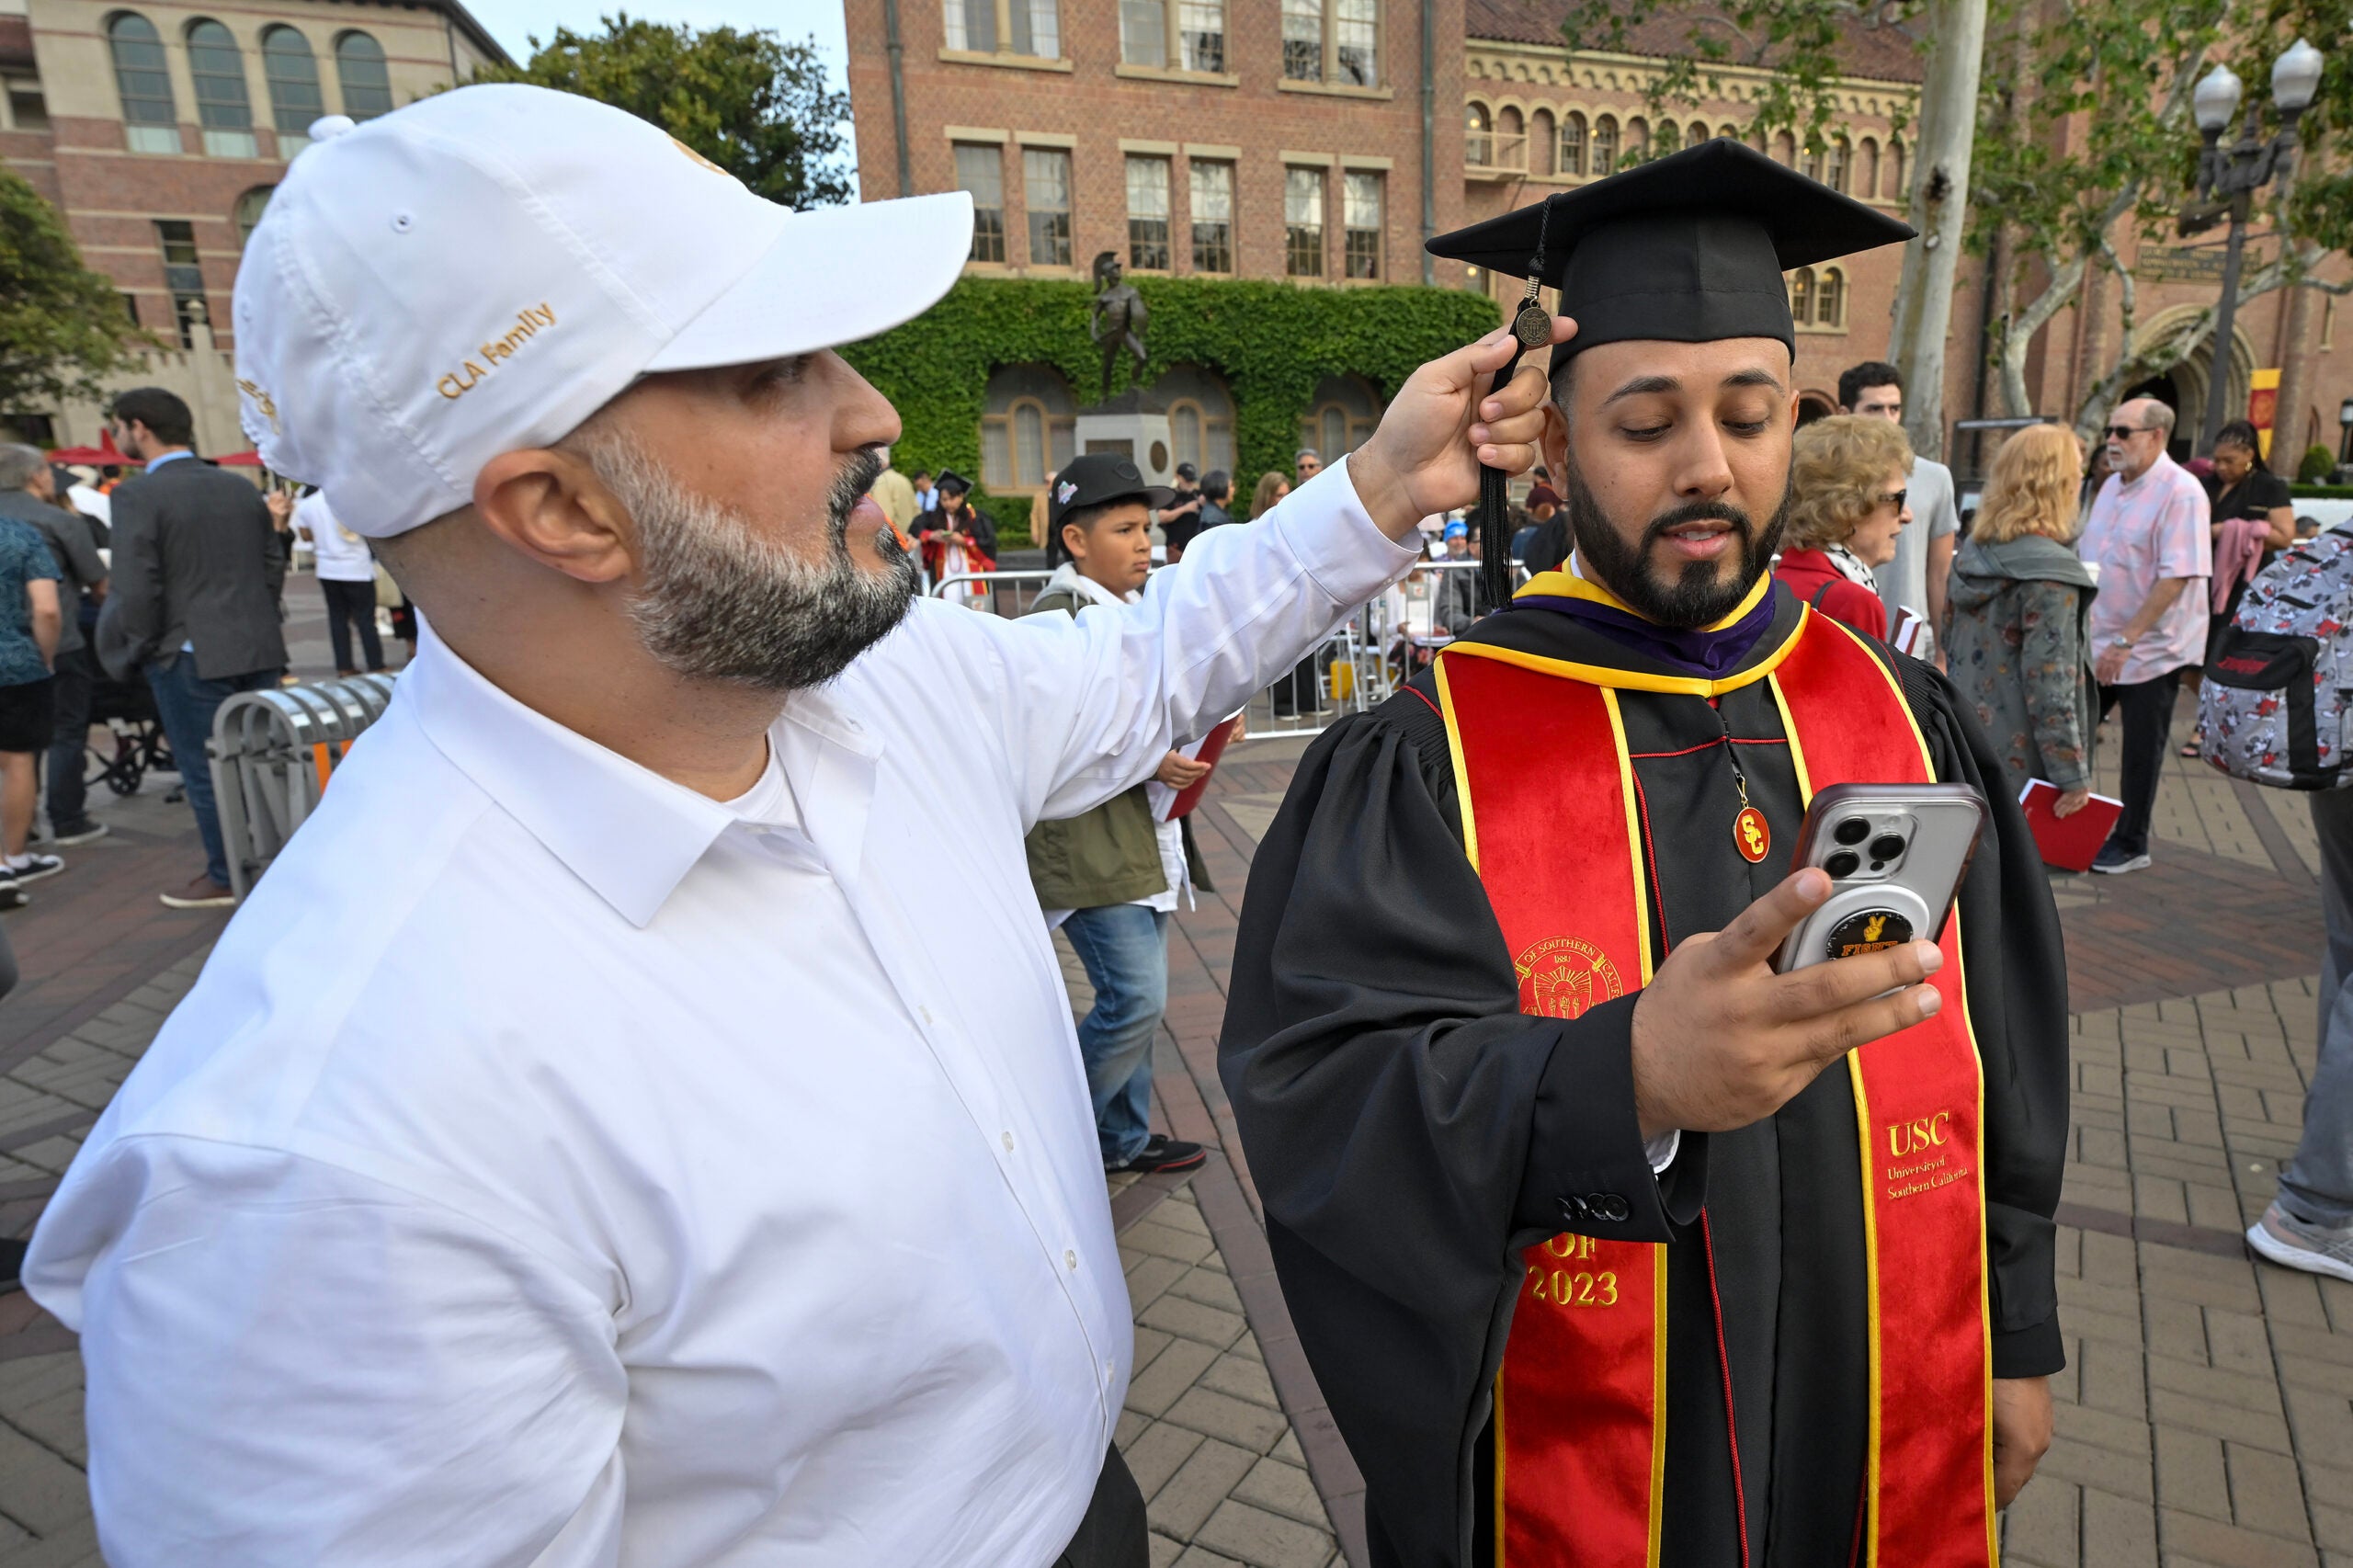 Shabear Adina adjusts brother Kabir Adina’s tassel during the 140th commencement ceremony at the University of Southern California, May 12, 2023. (Photo/Gus Ruelas)